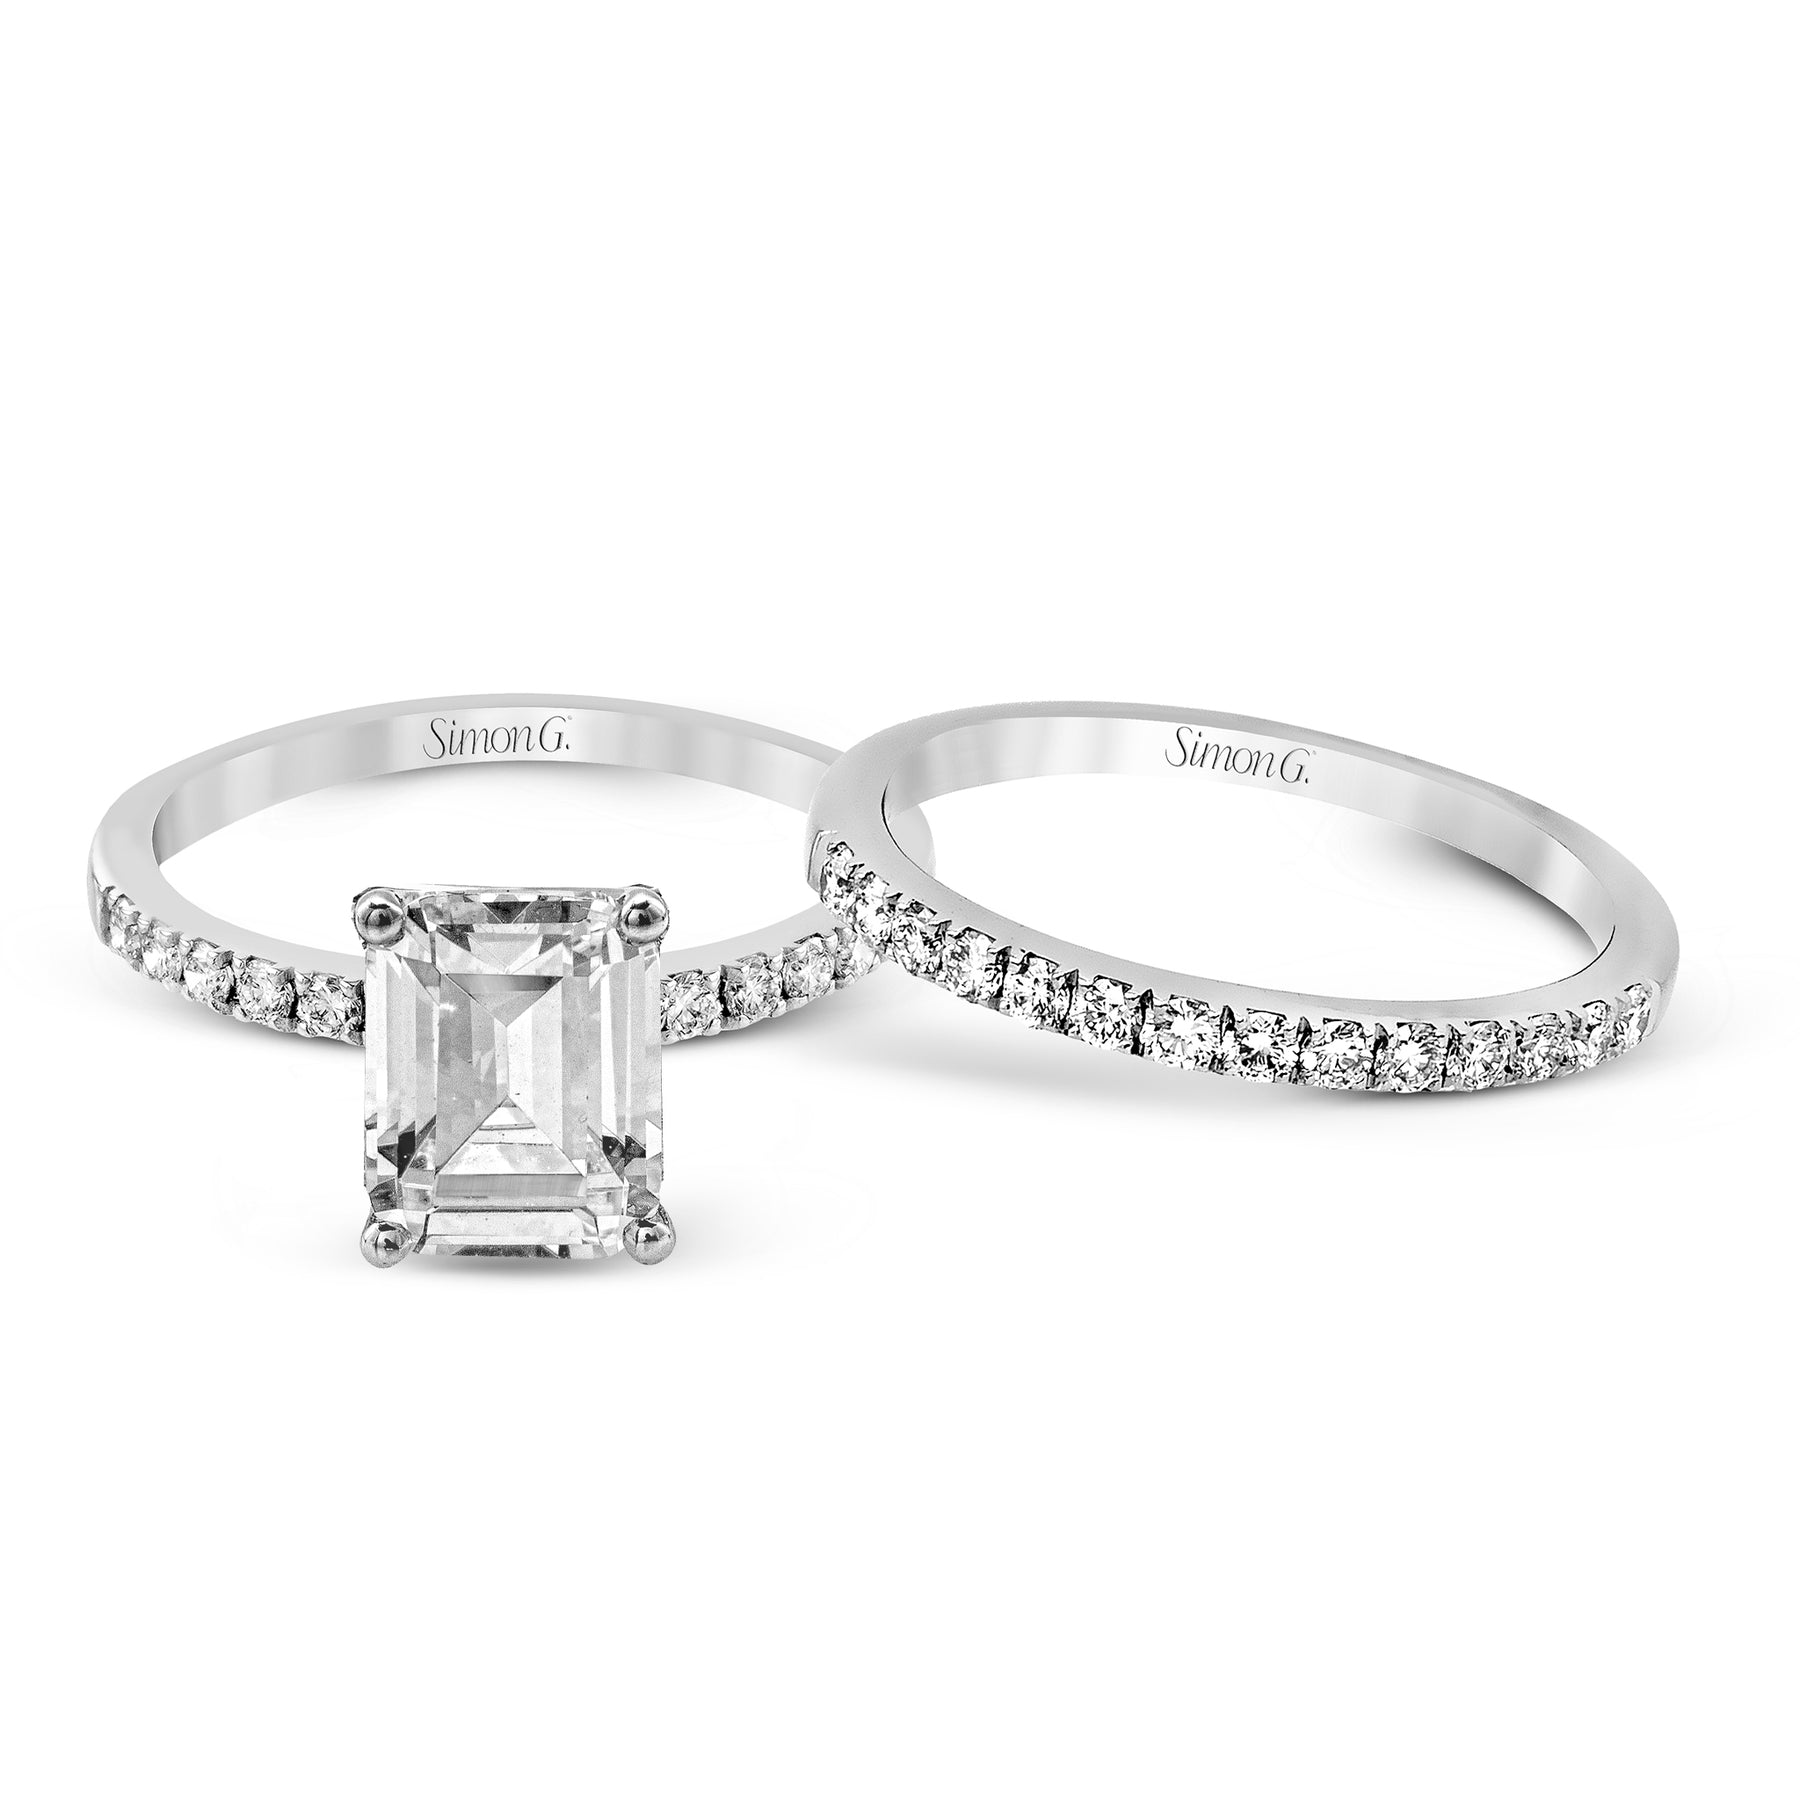 Emerald-cut Engagement Ring & Matching Wedding Band in 18k Gold with Diamonds MR1686-EM